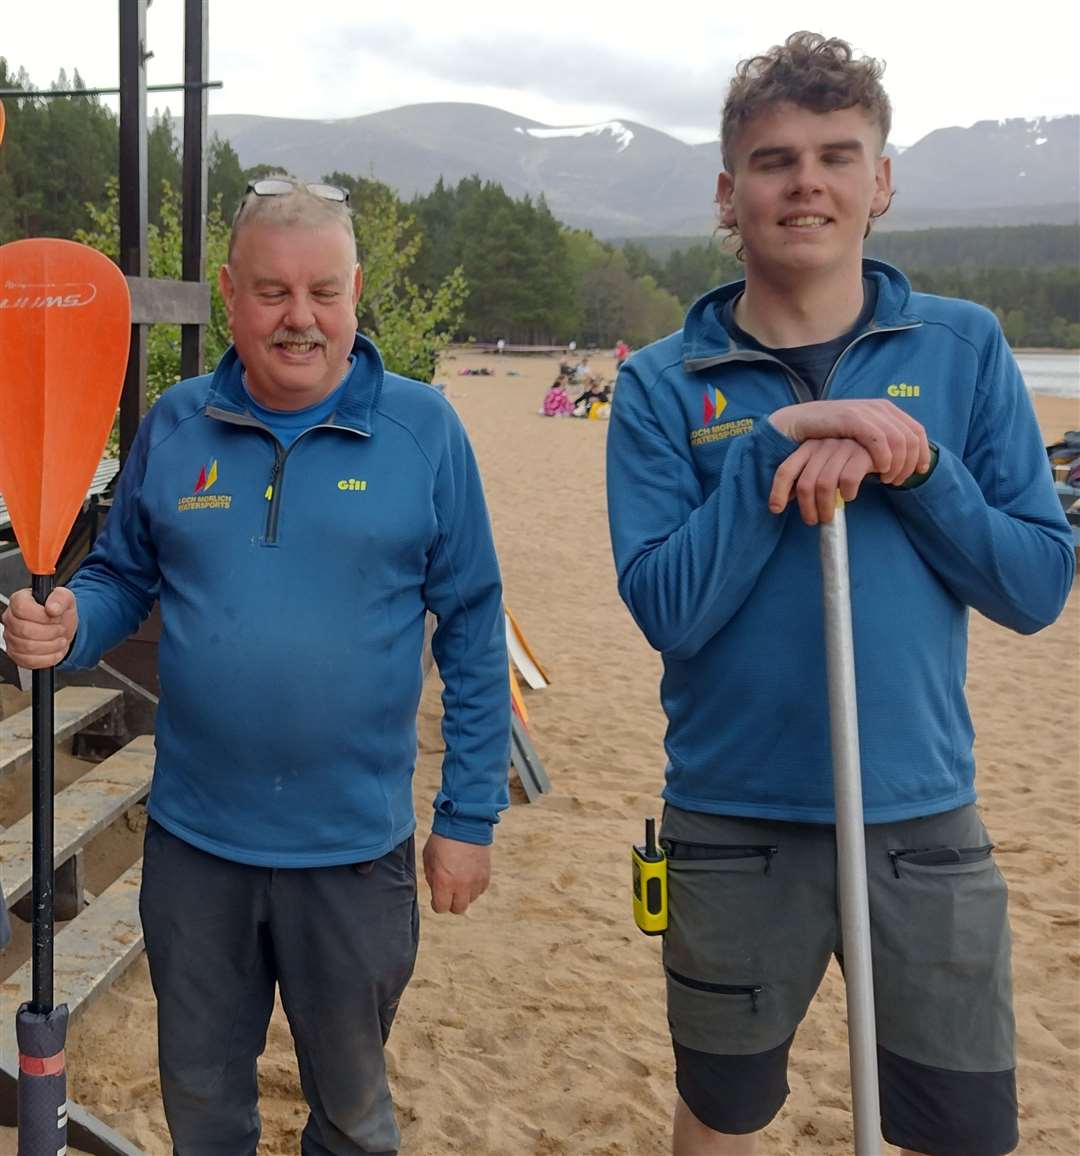 Neil Highmore and son Neil at Loch Morlich Watersports: totally behind the local politicians' stance and the need to 'get real' over parking in Glenmore